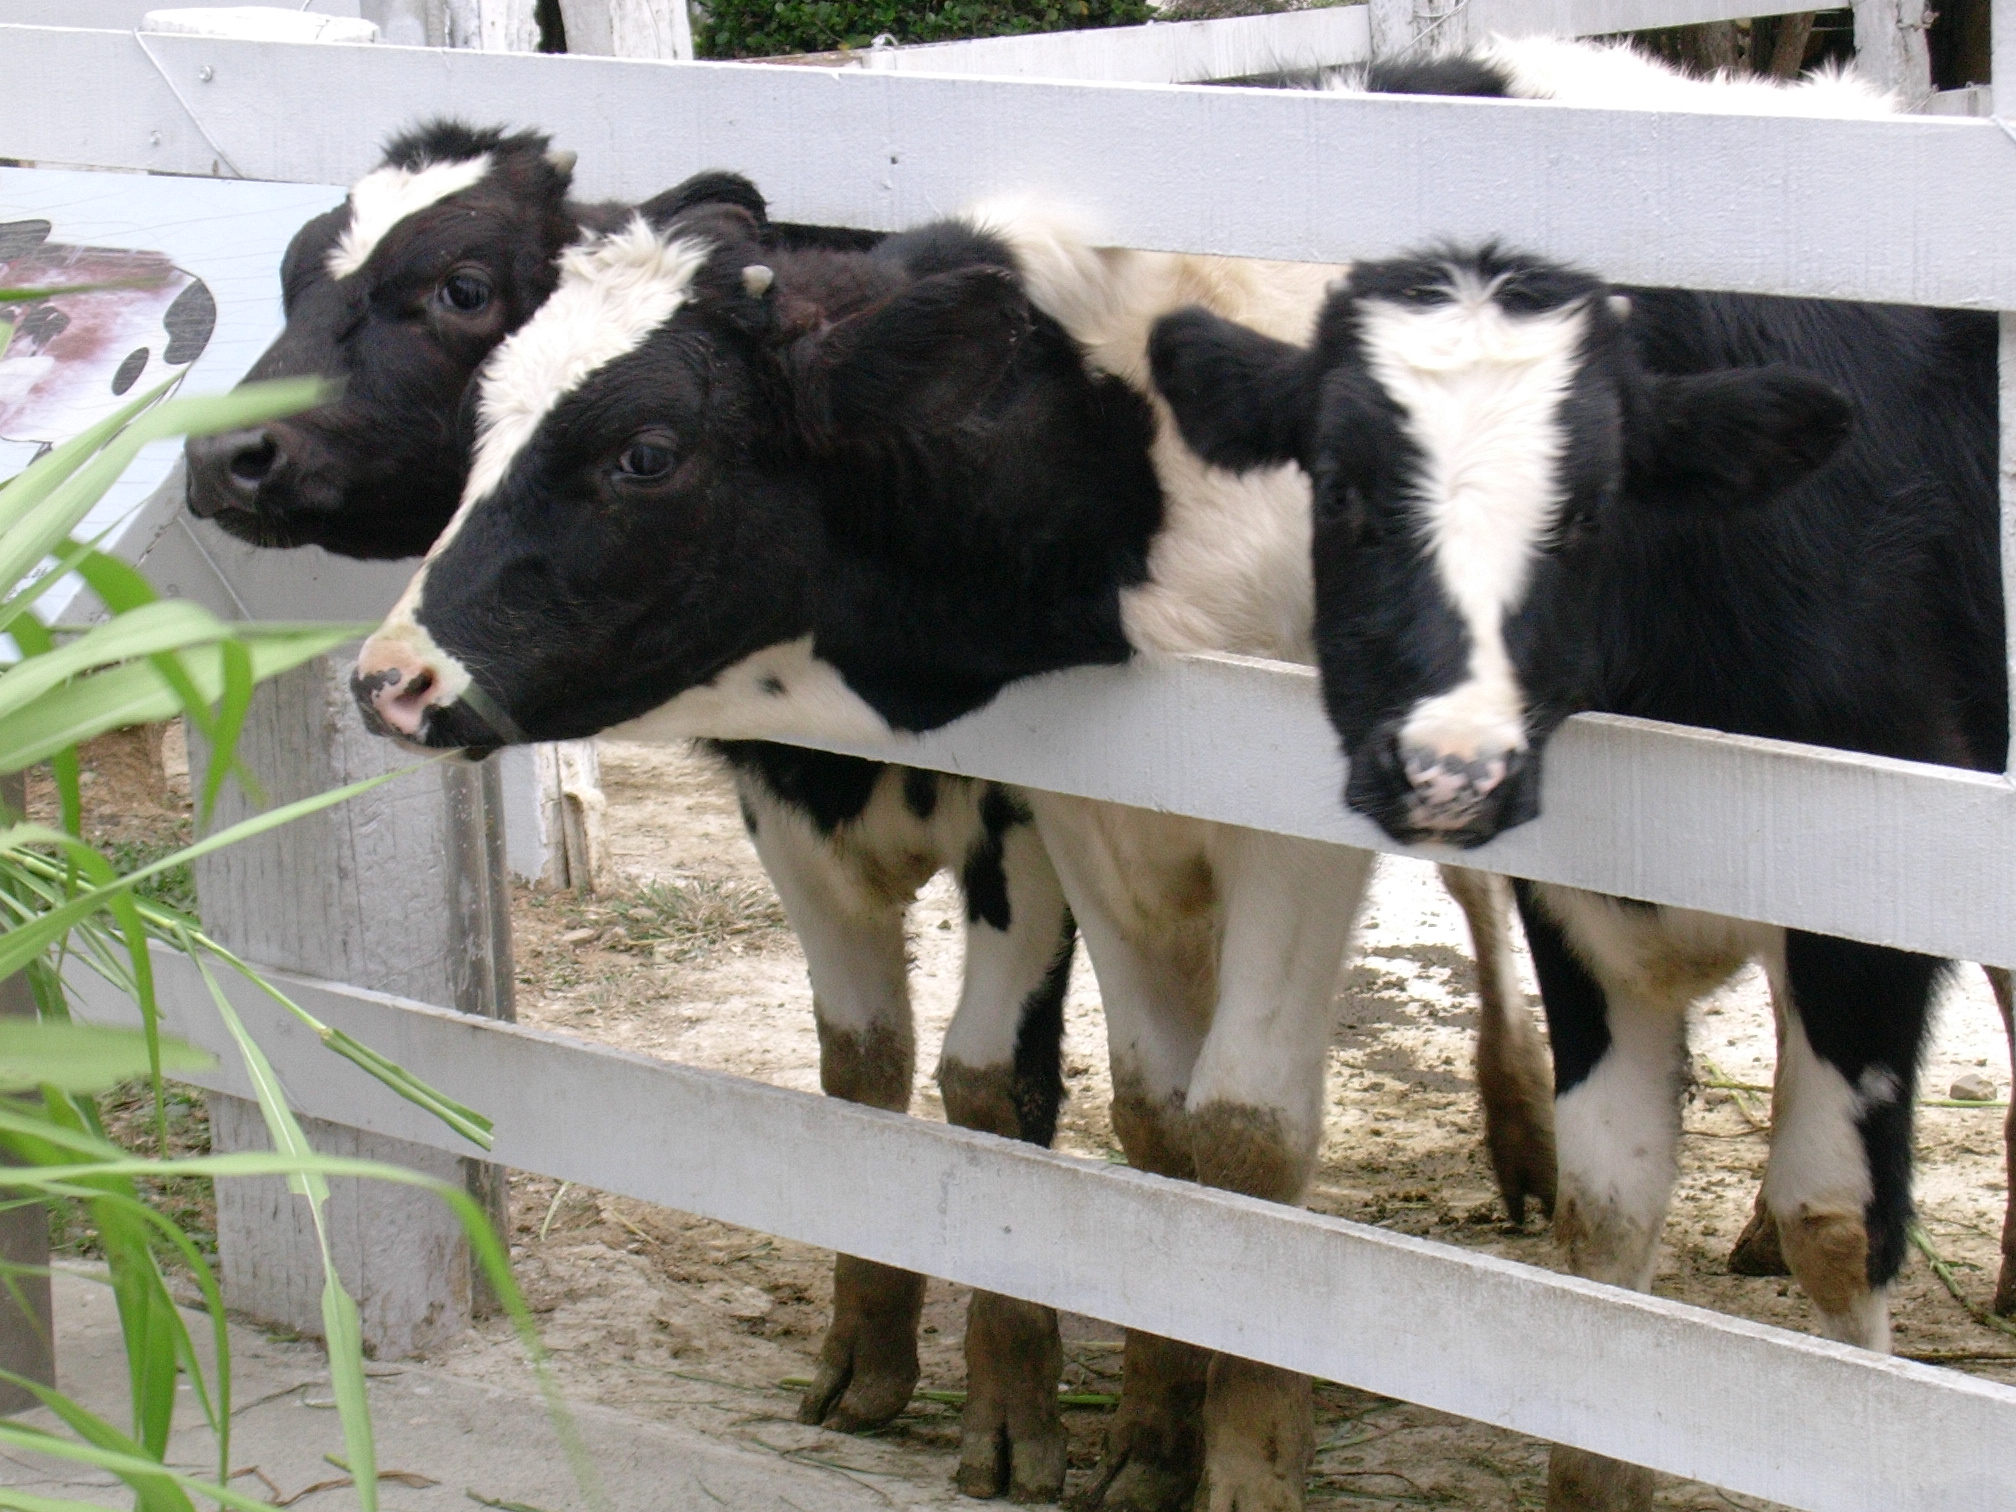 Cows poking their head out of a fence.